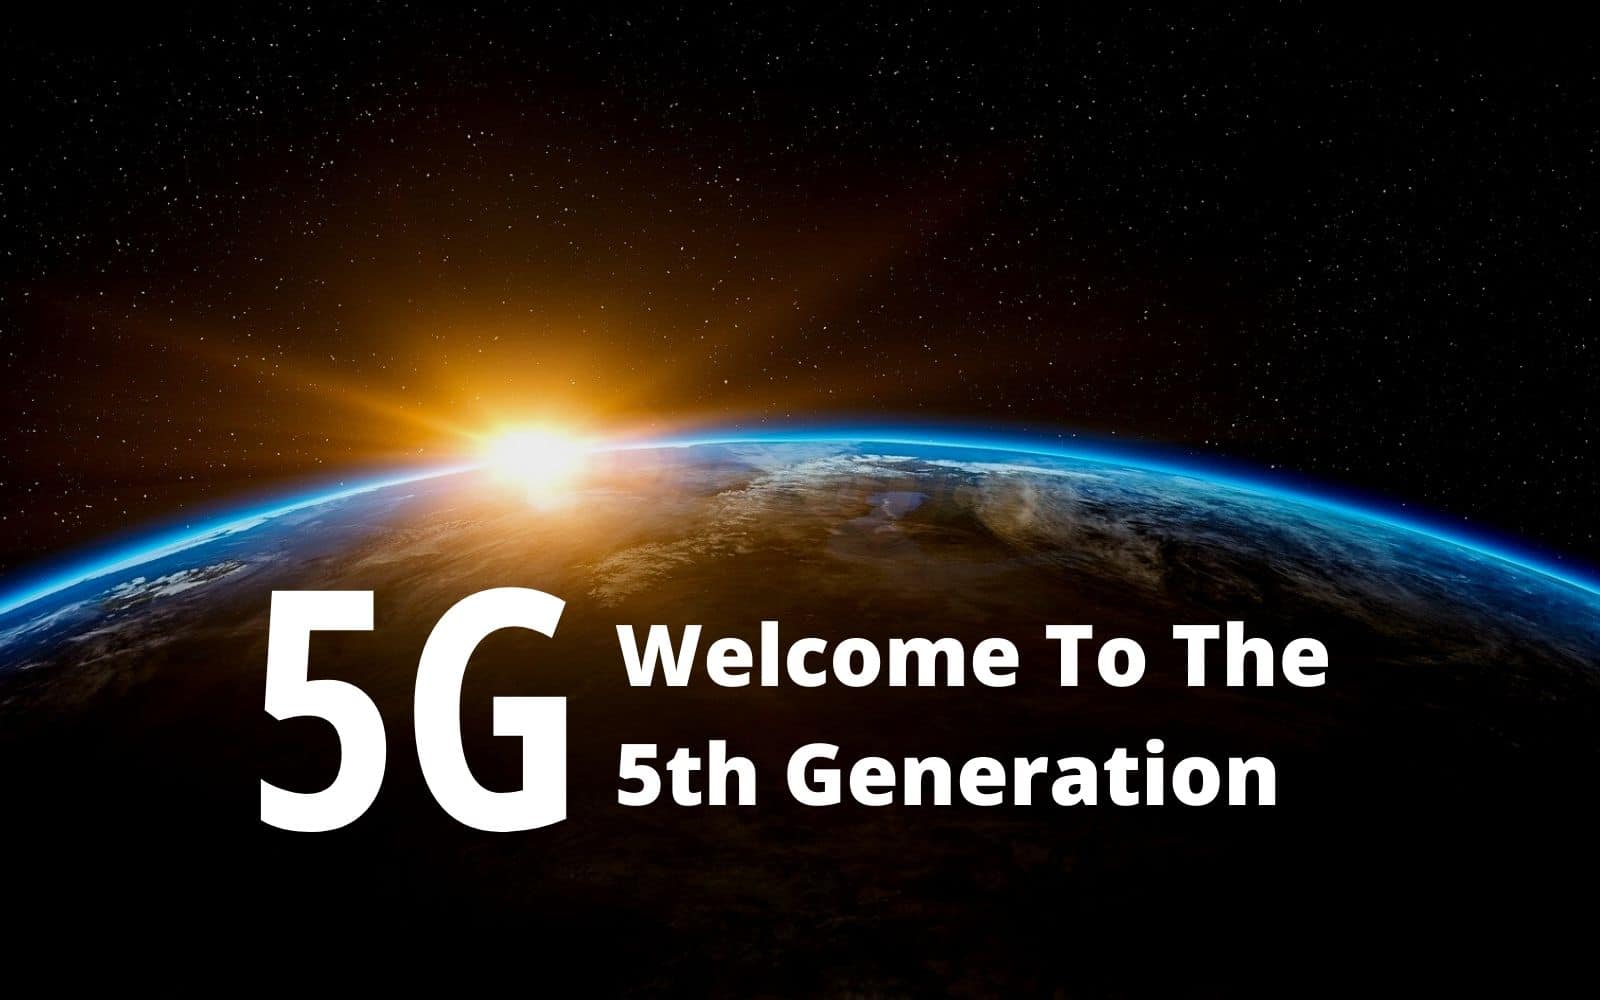 Is Your Business Ready For 5G?